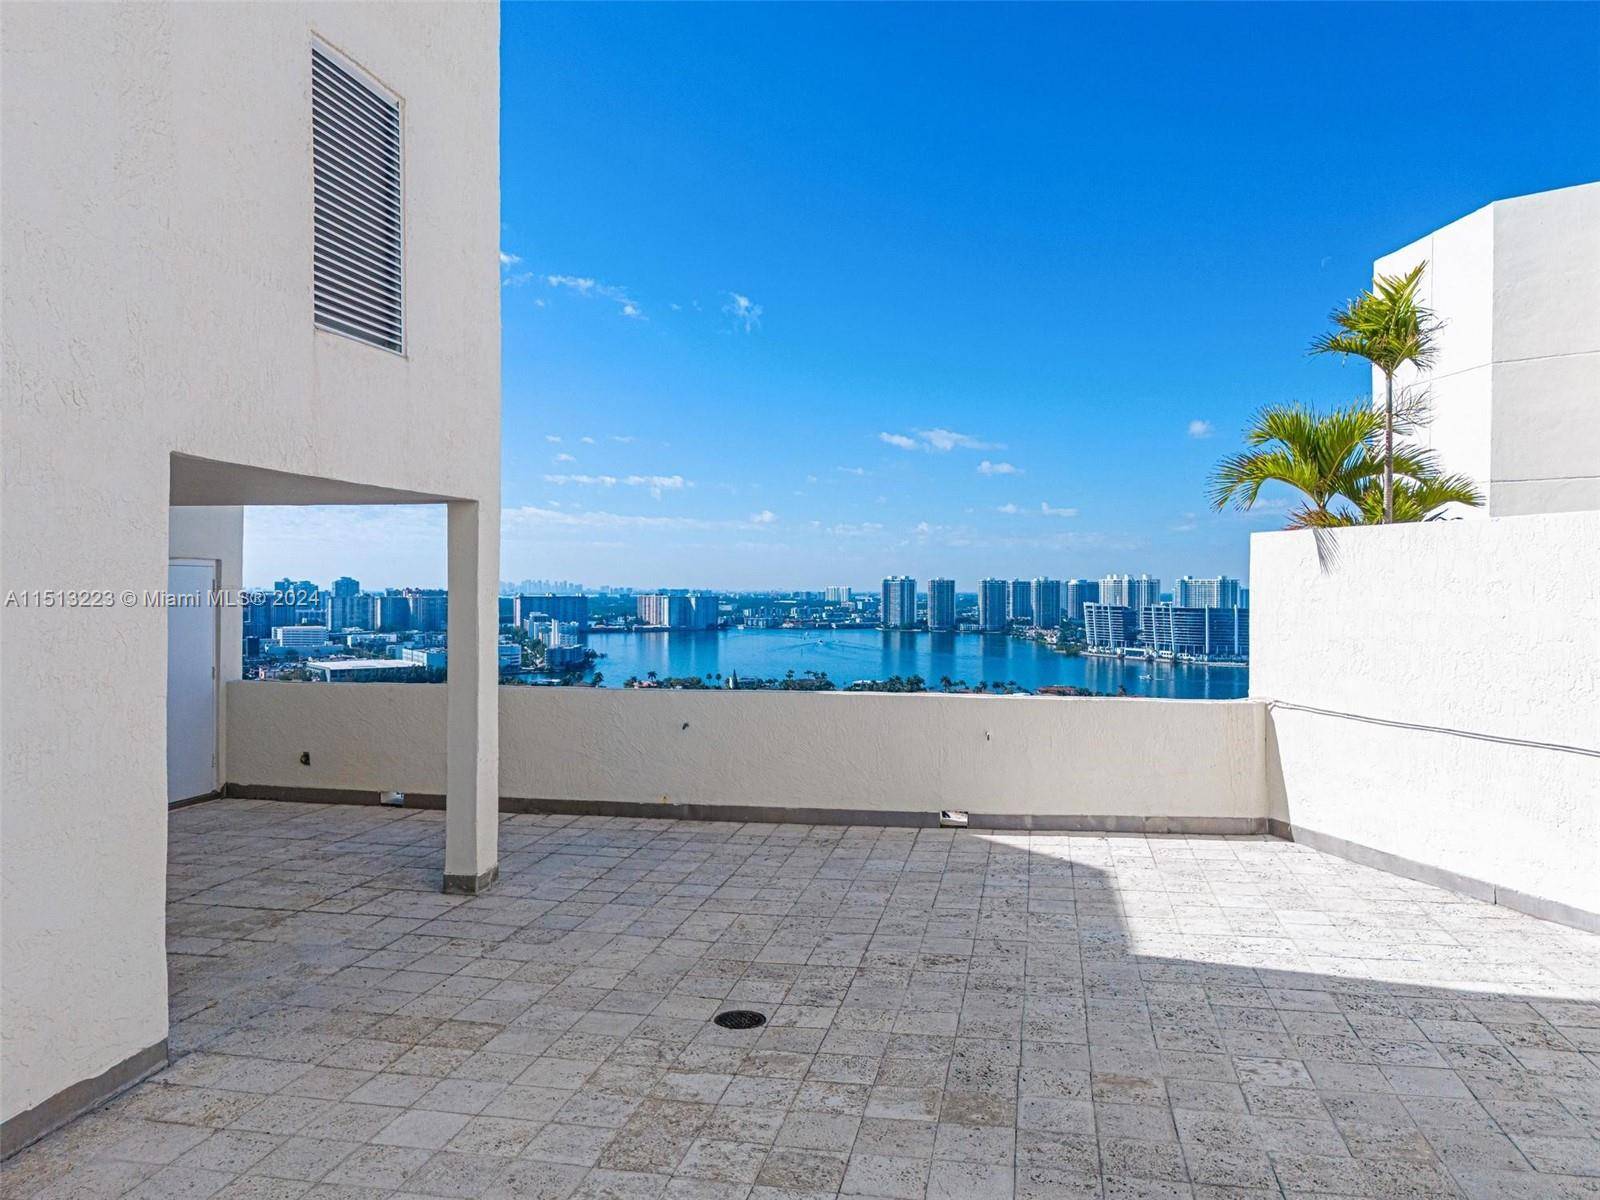 Rare opportunity to own 2 Story Beachfront Penthouse.